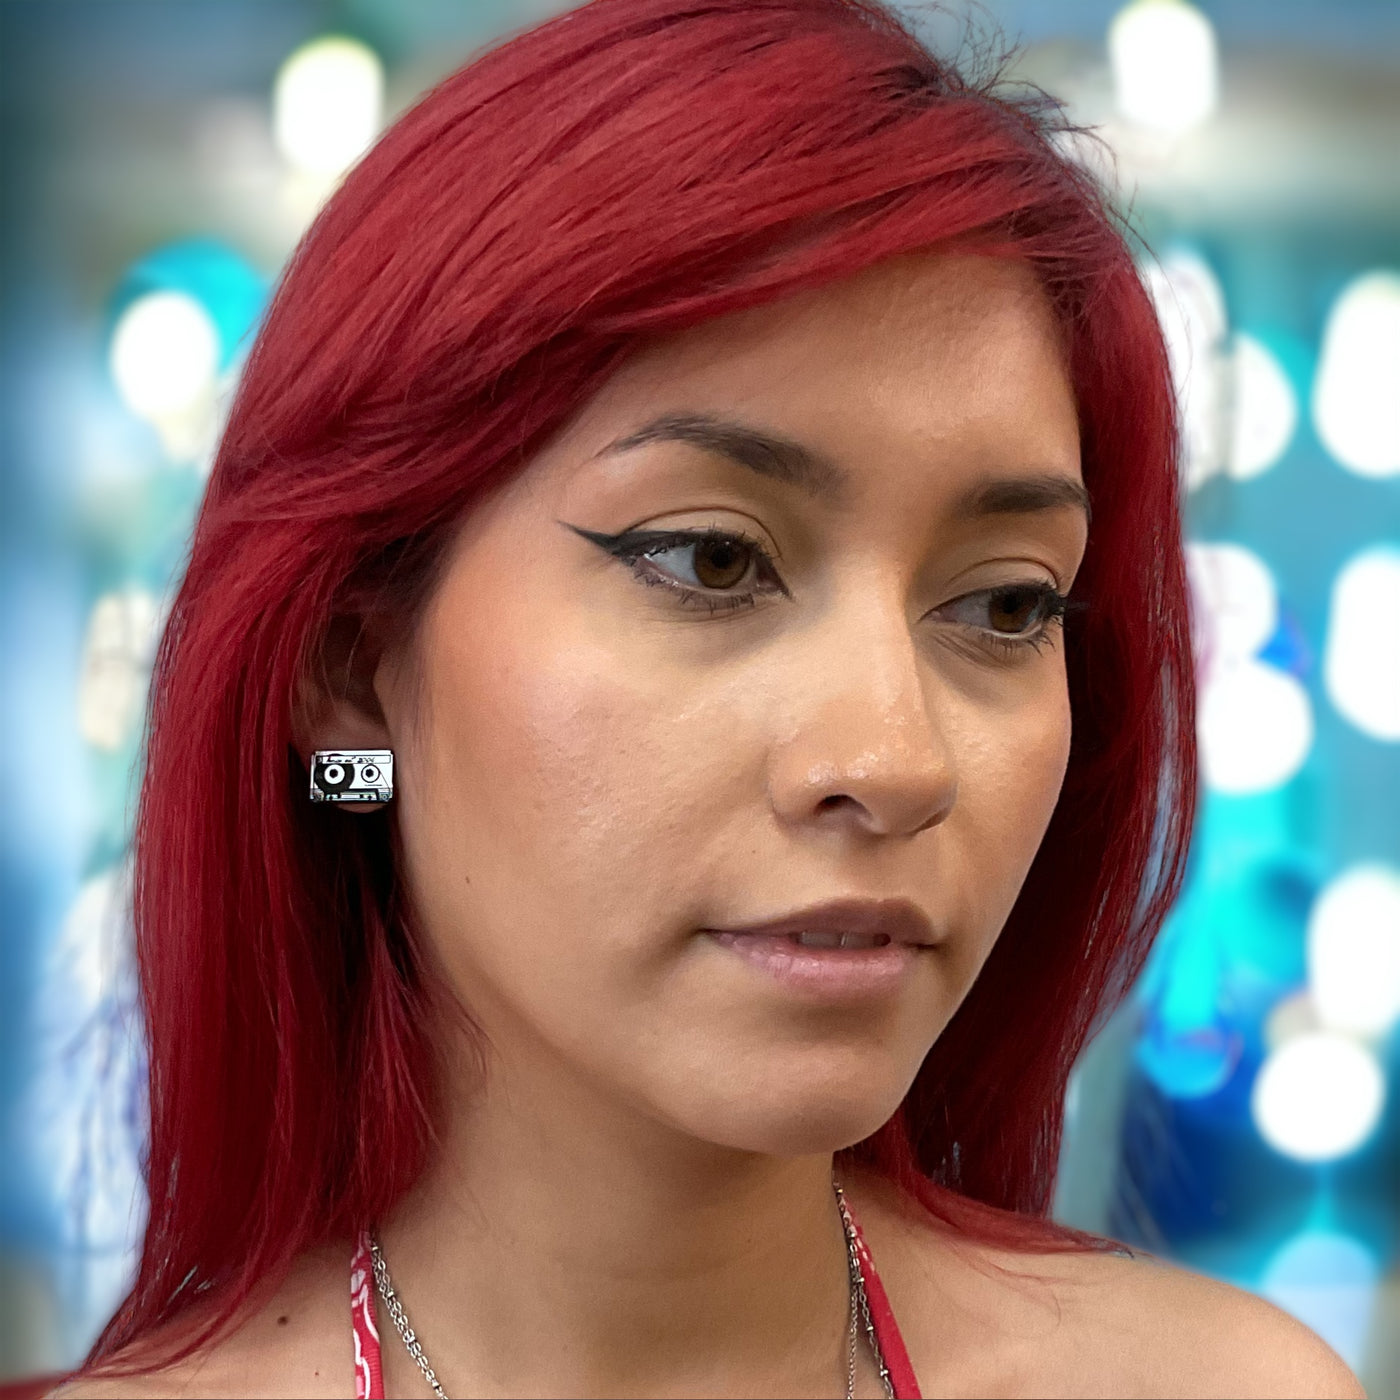 Silver tone, plastic cassette earrings on an alternatively styled model with bright red hair.